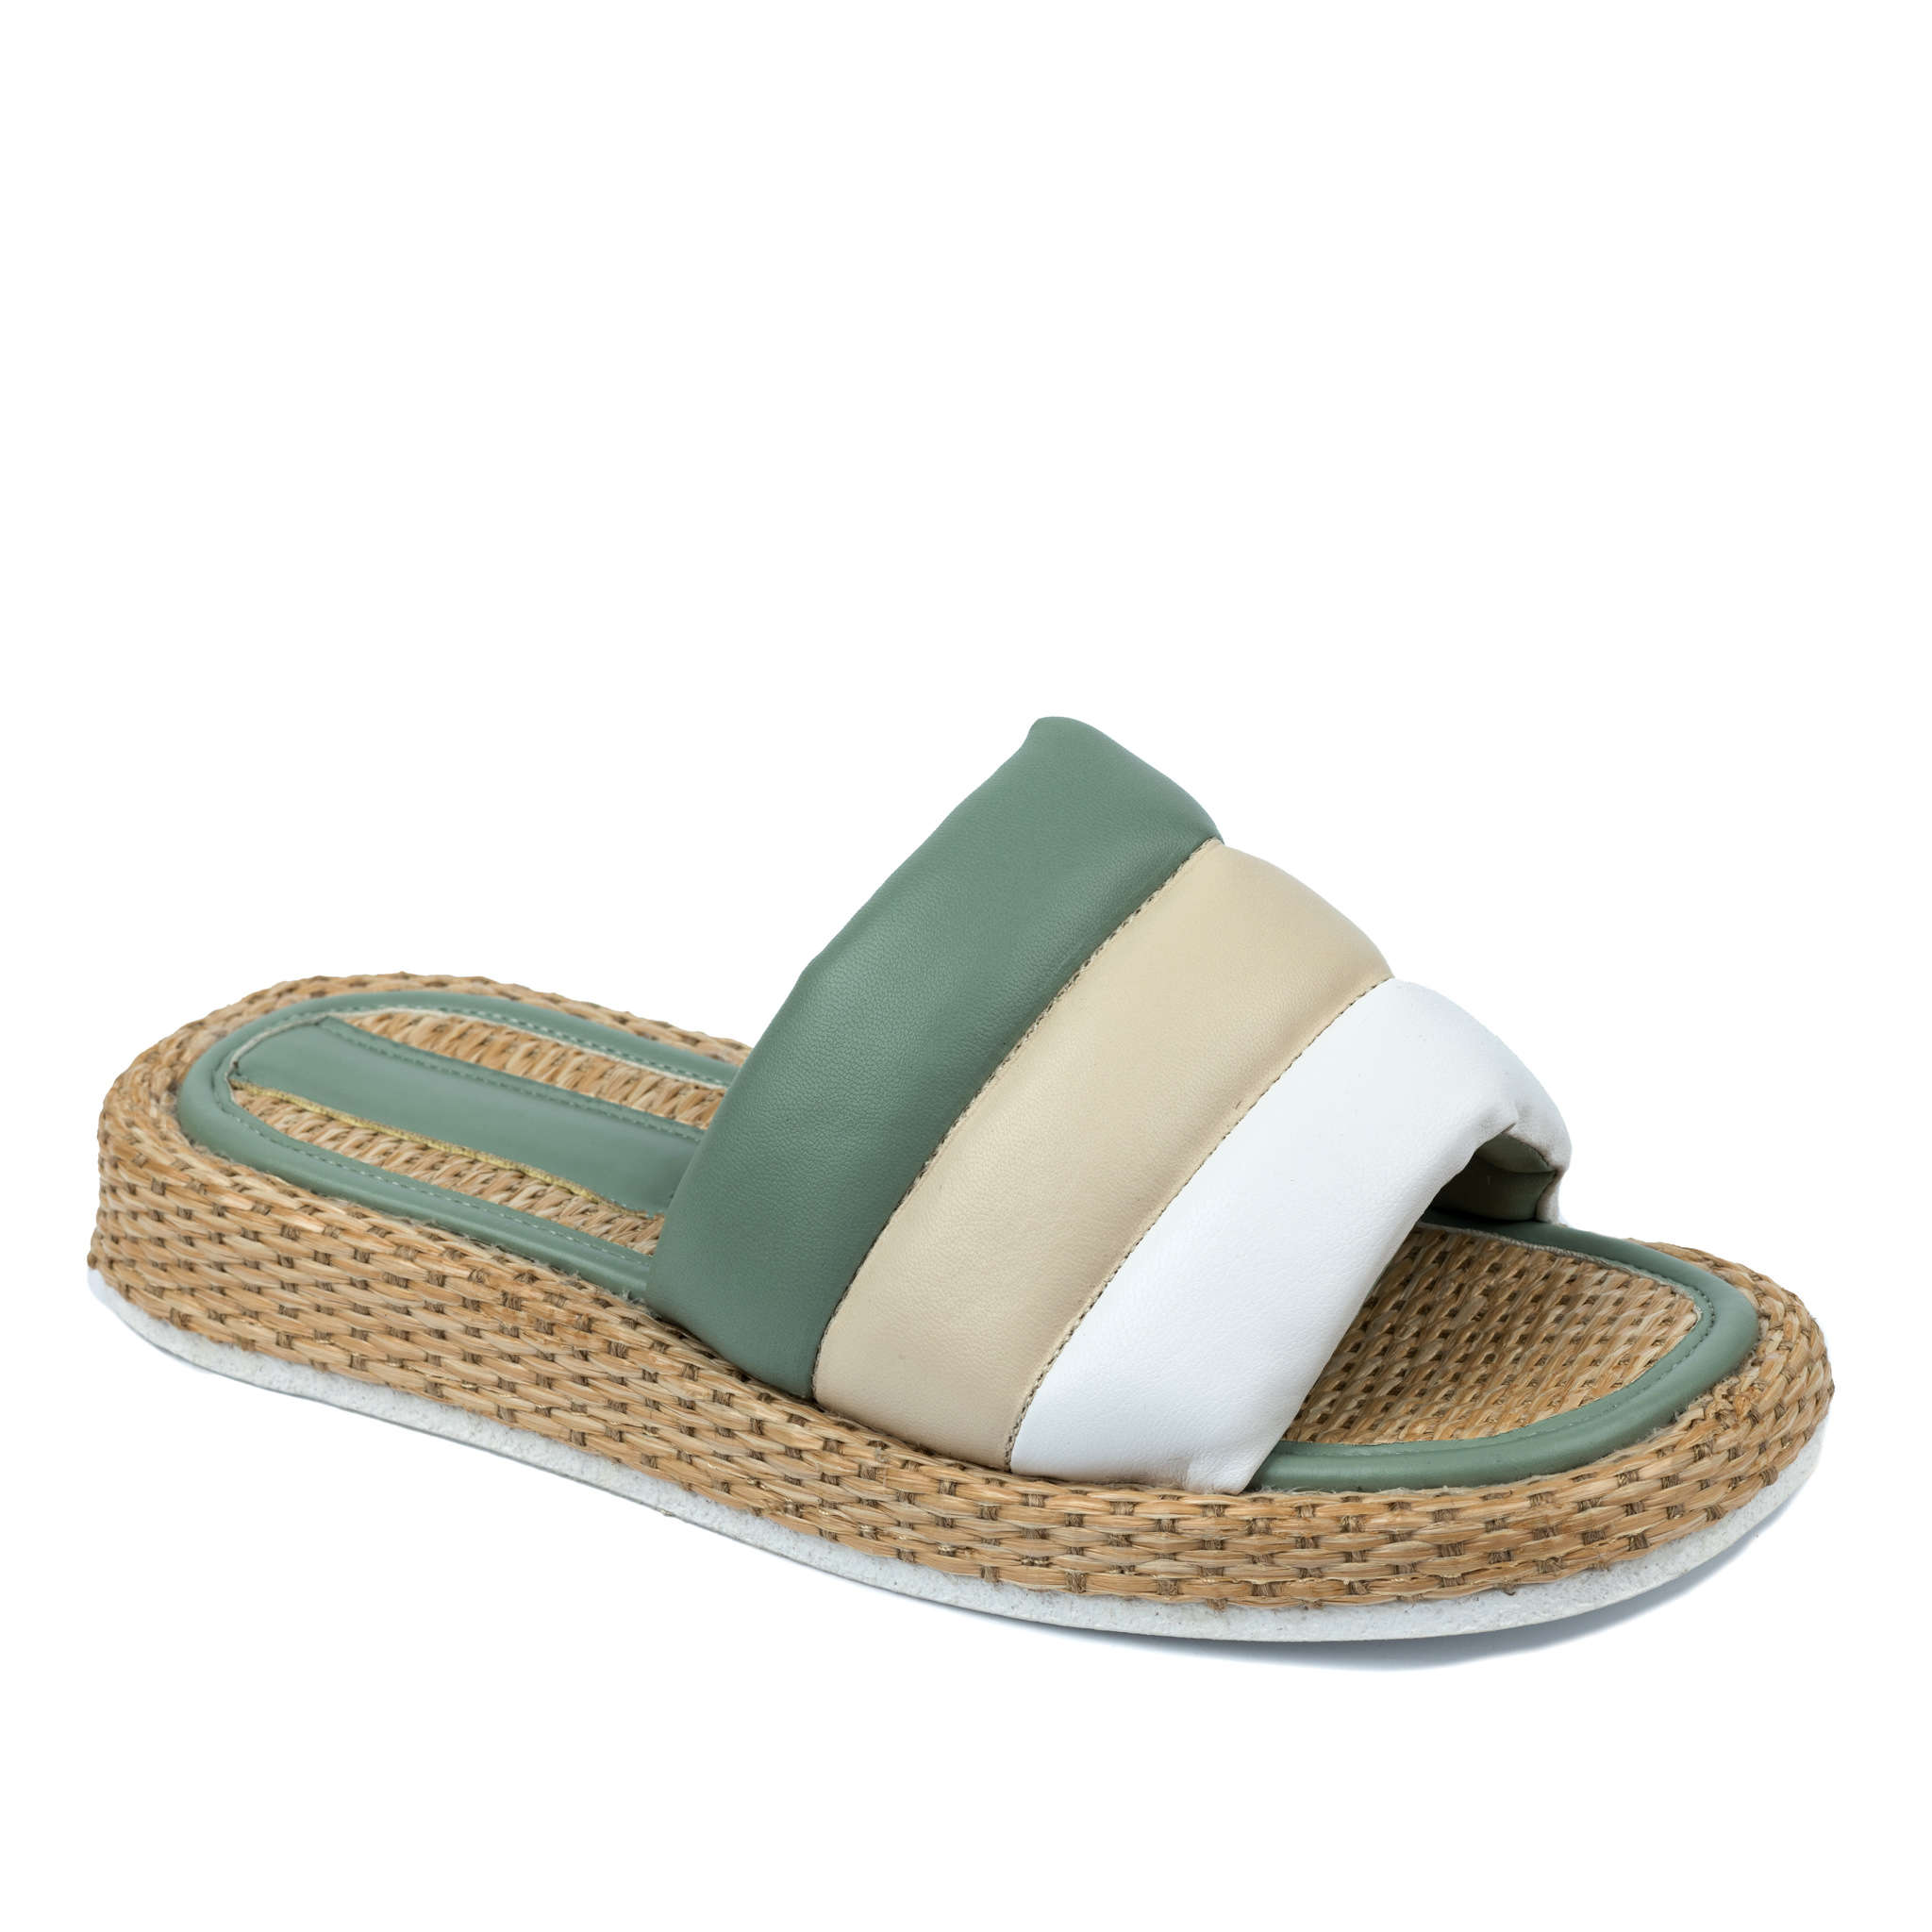 Women Slippers and Mules A553 - MINT